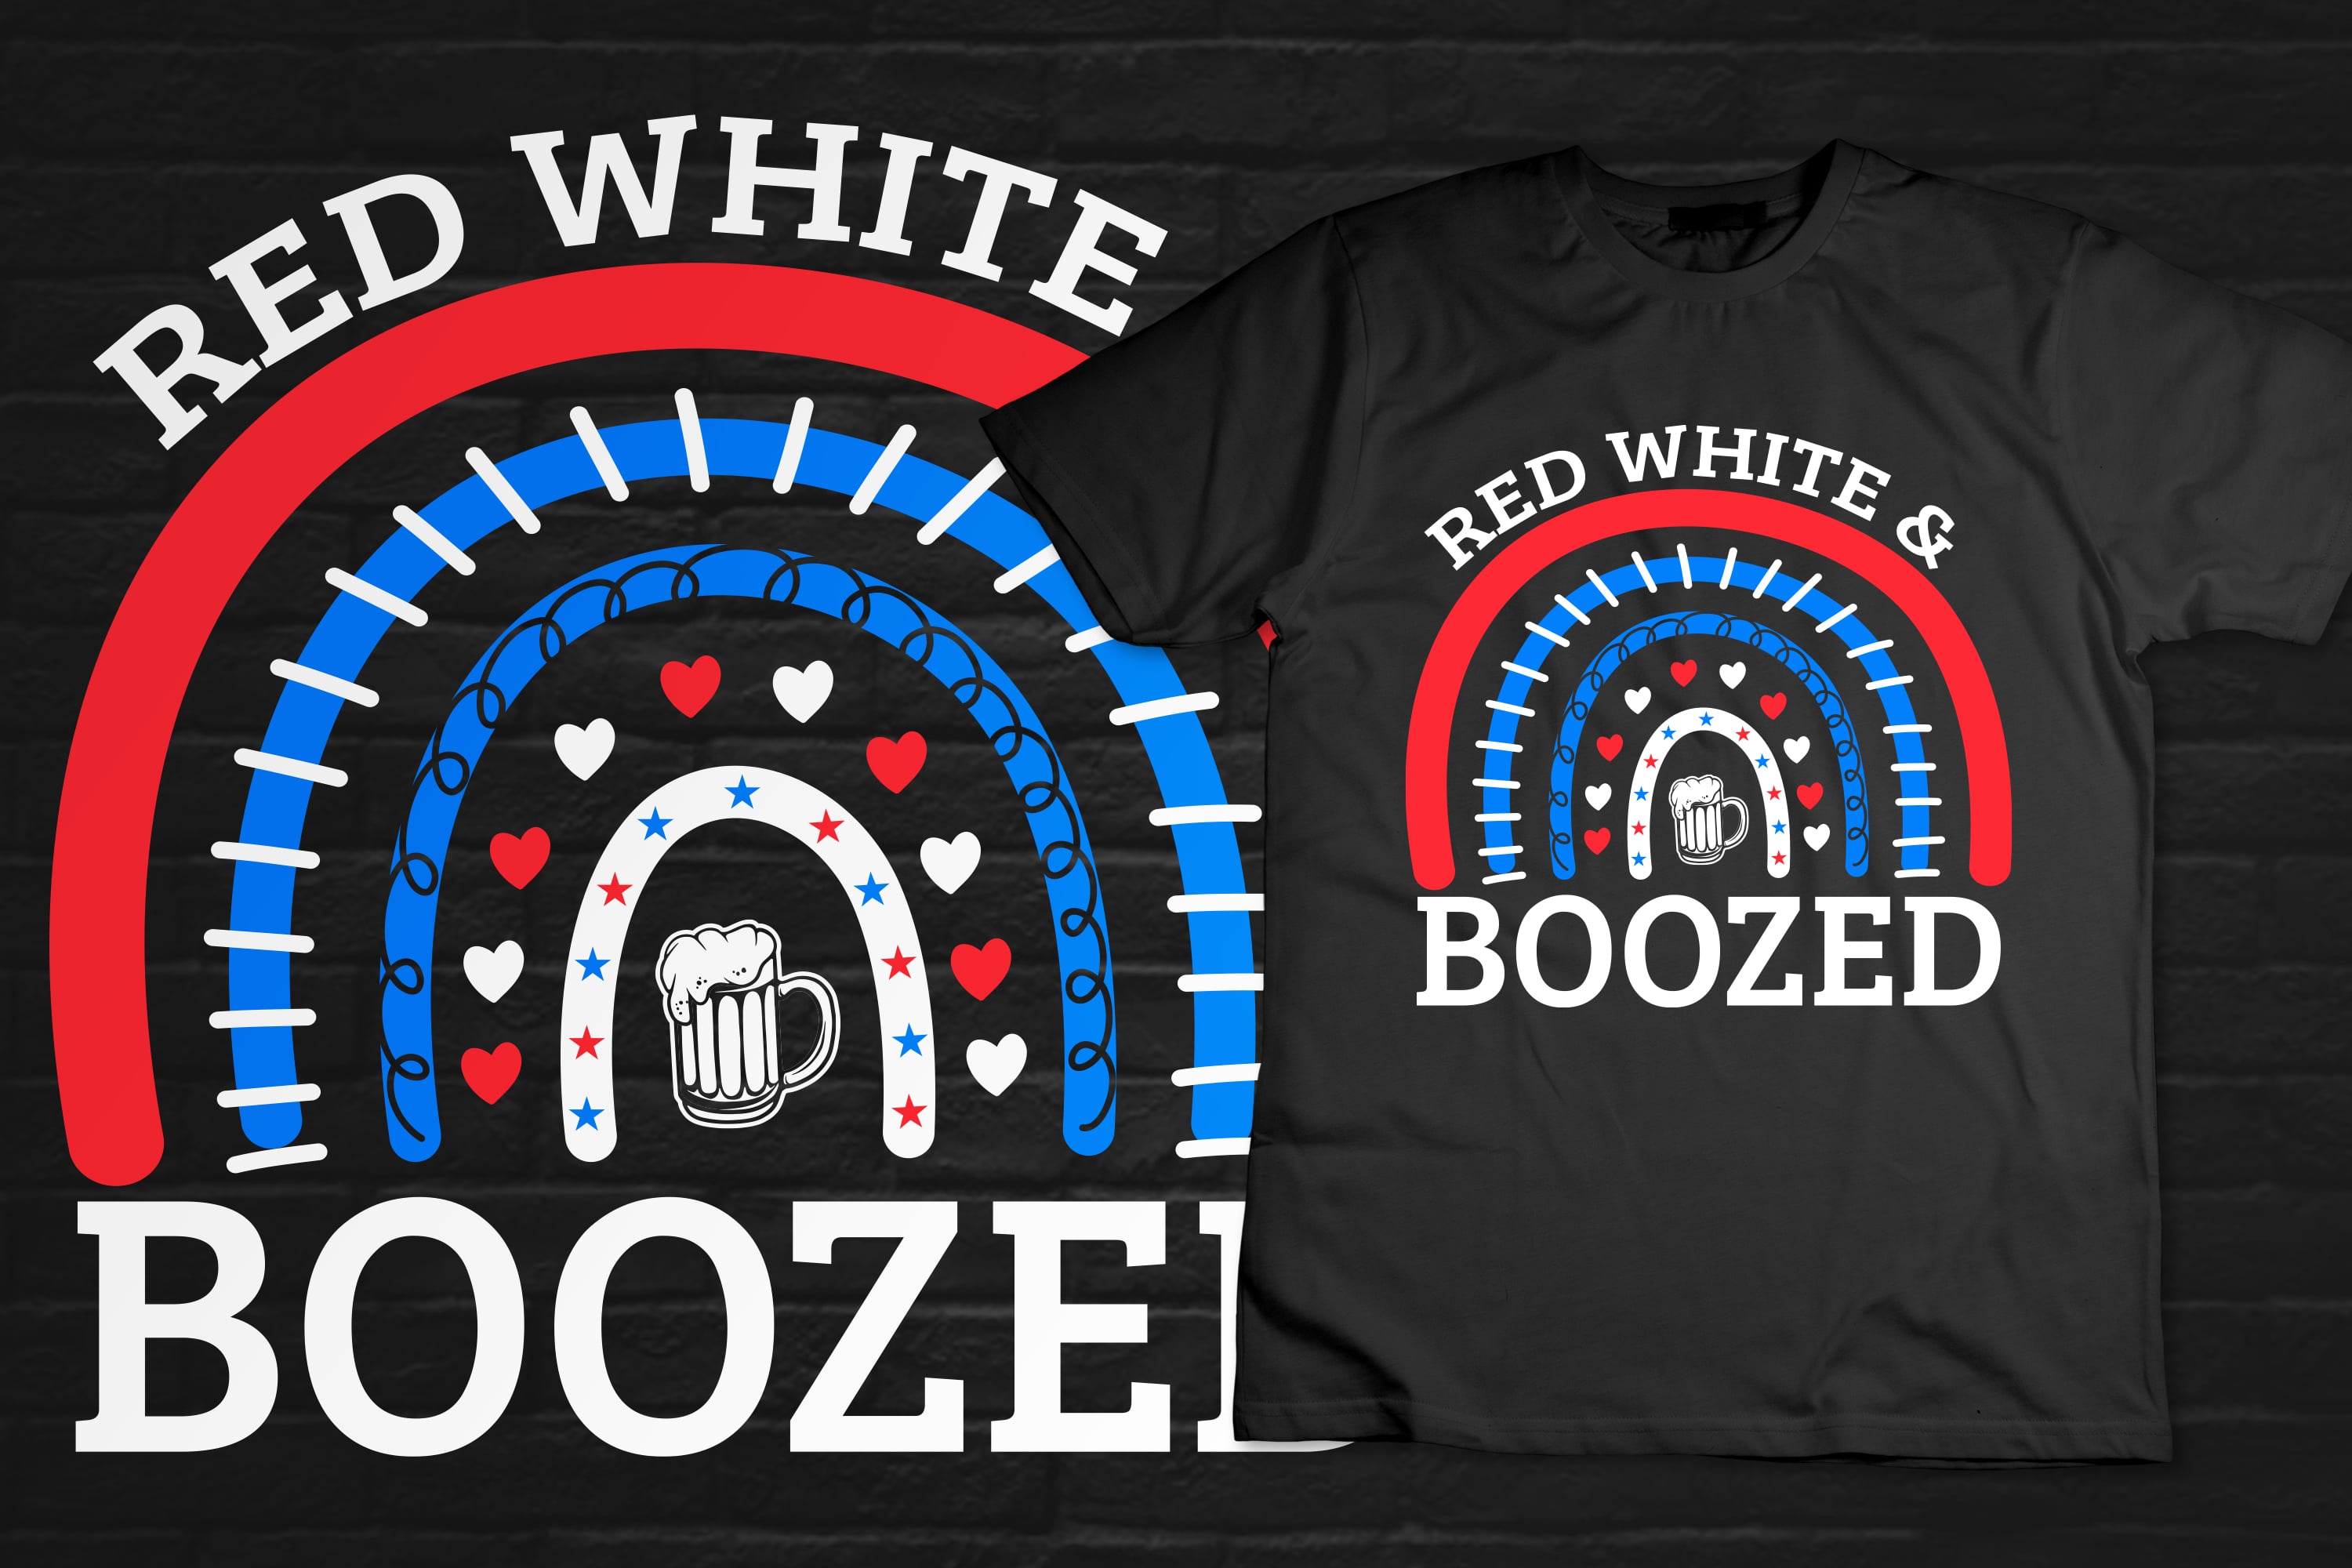 T - shirt with a red white and booze design on it.